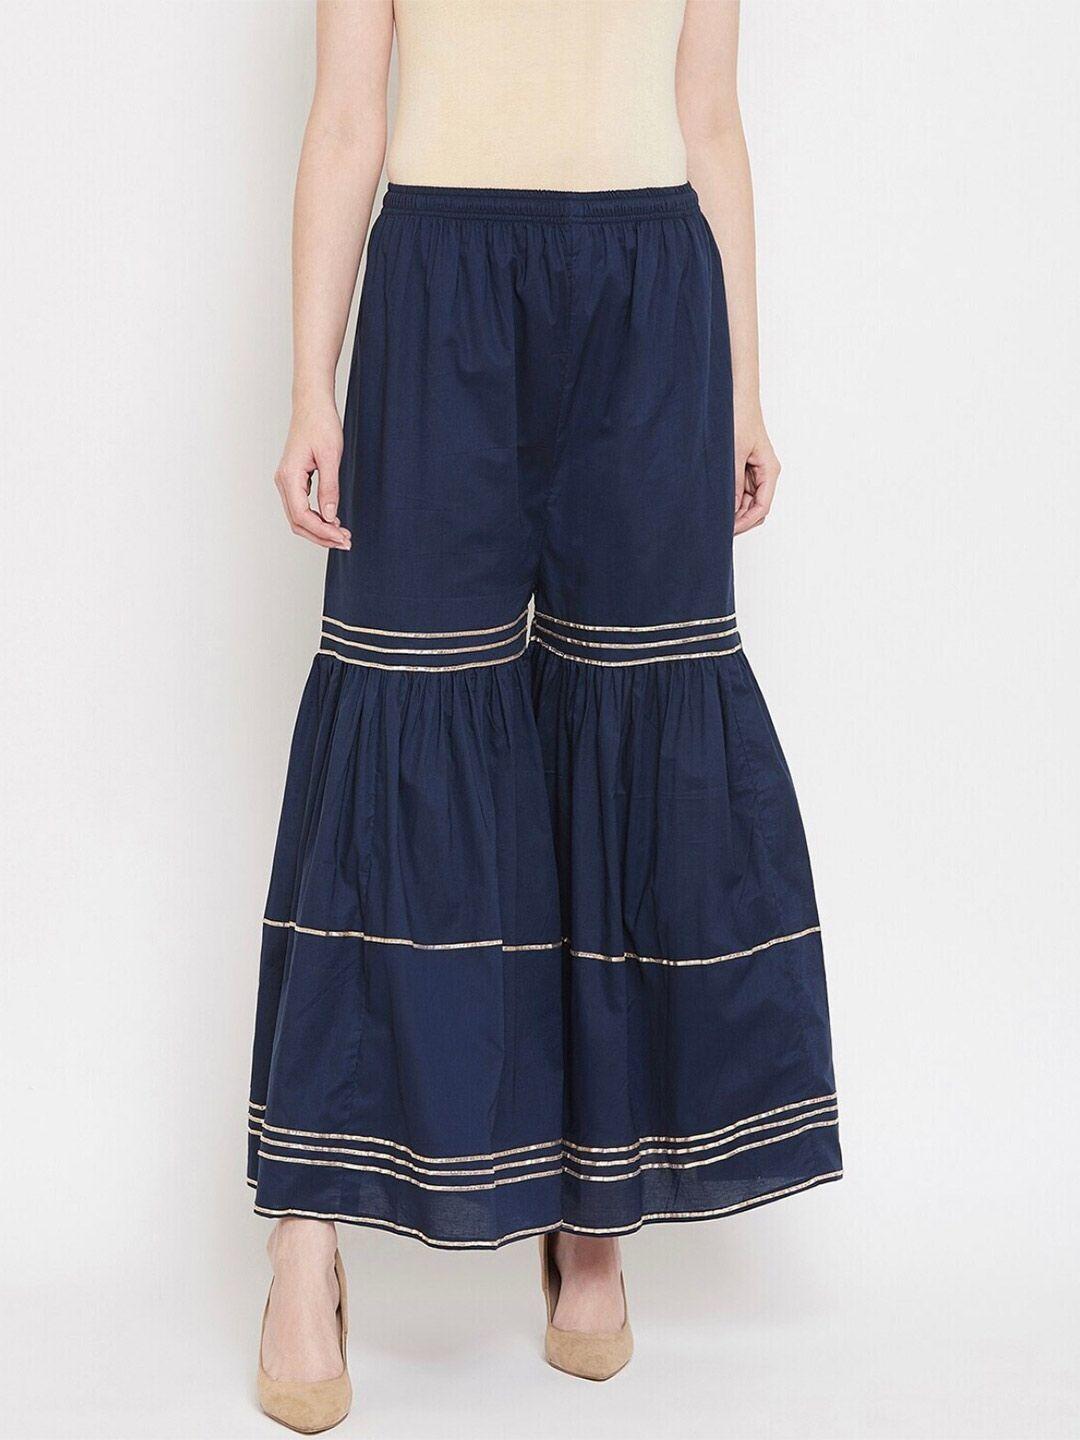 bcz style women navy blue & gold-toned striped flared handloom palazzos